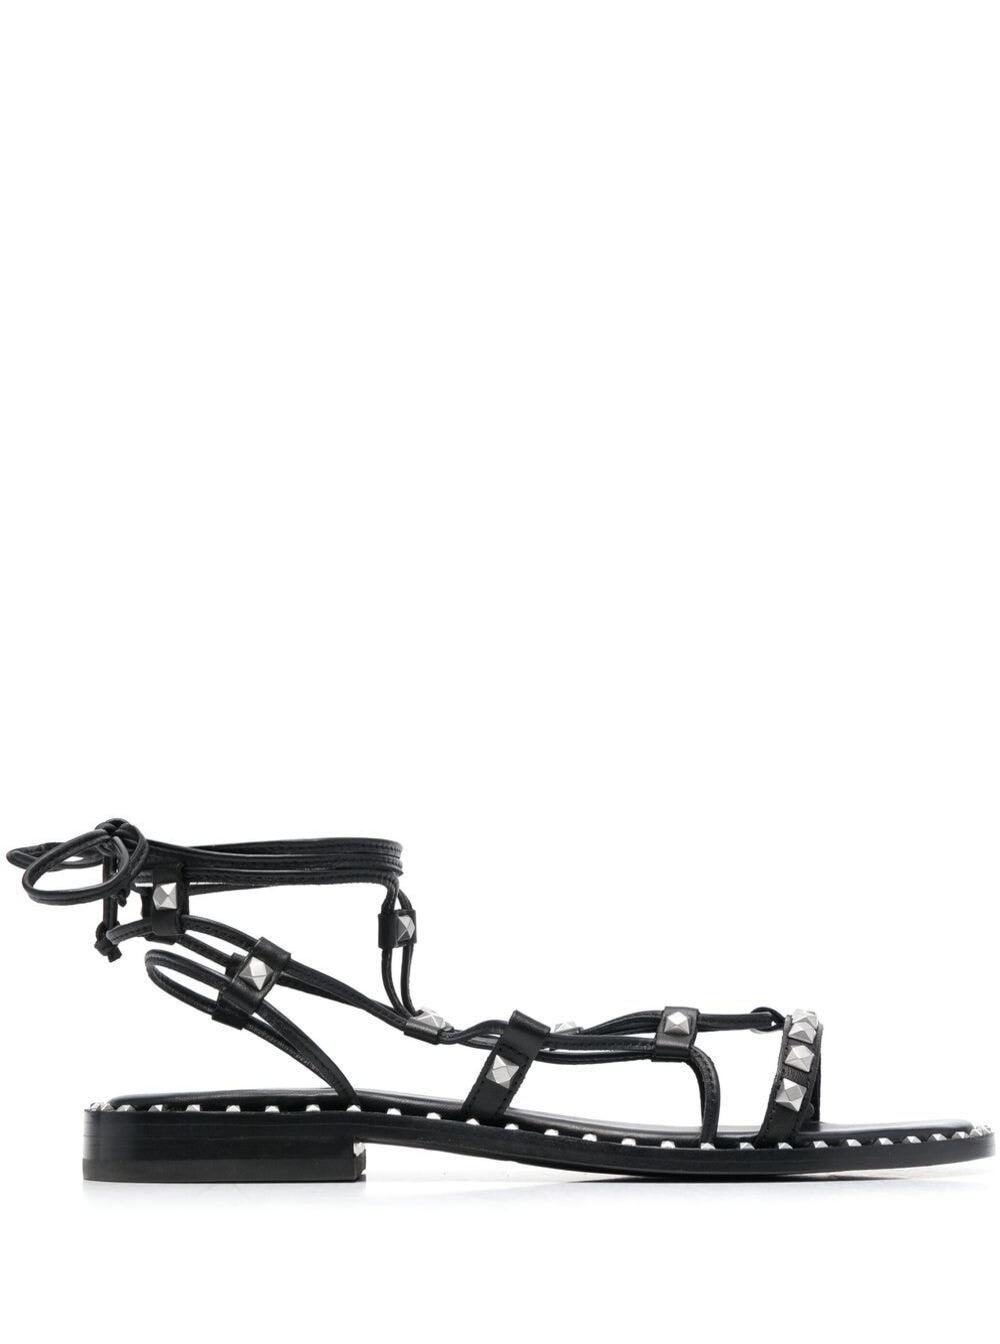 ASH PALOMA BLACK LACE-UP FLAT SANDALS WITH STUDS IN LEATHER WOMAN